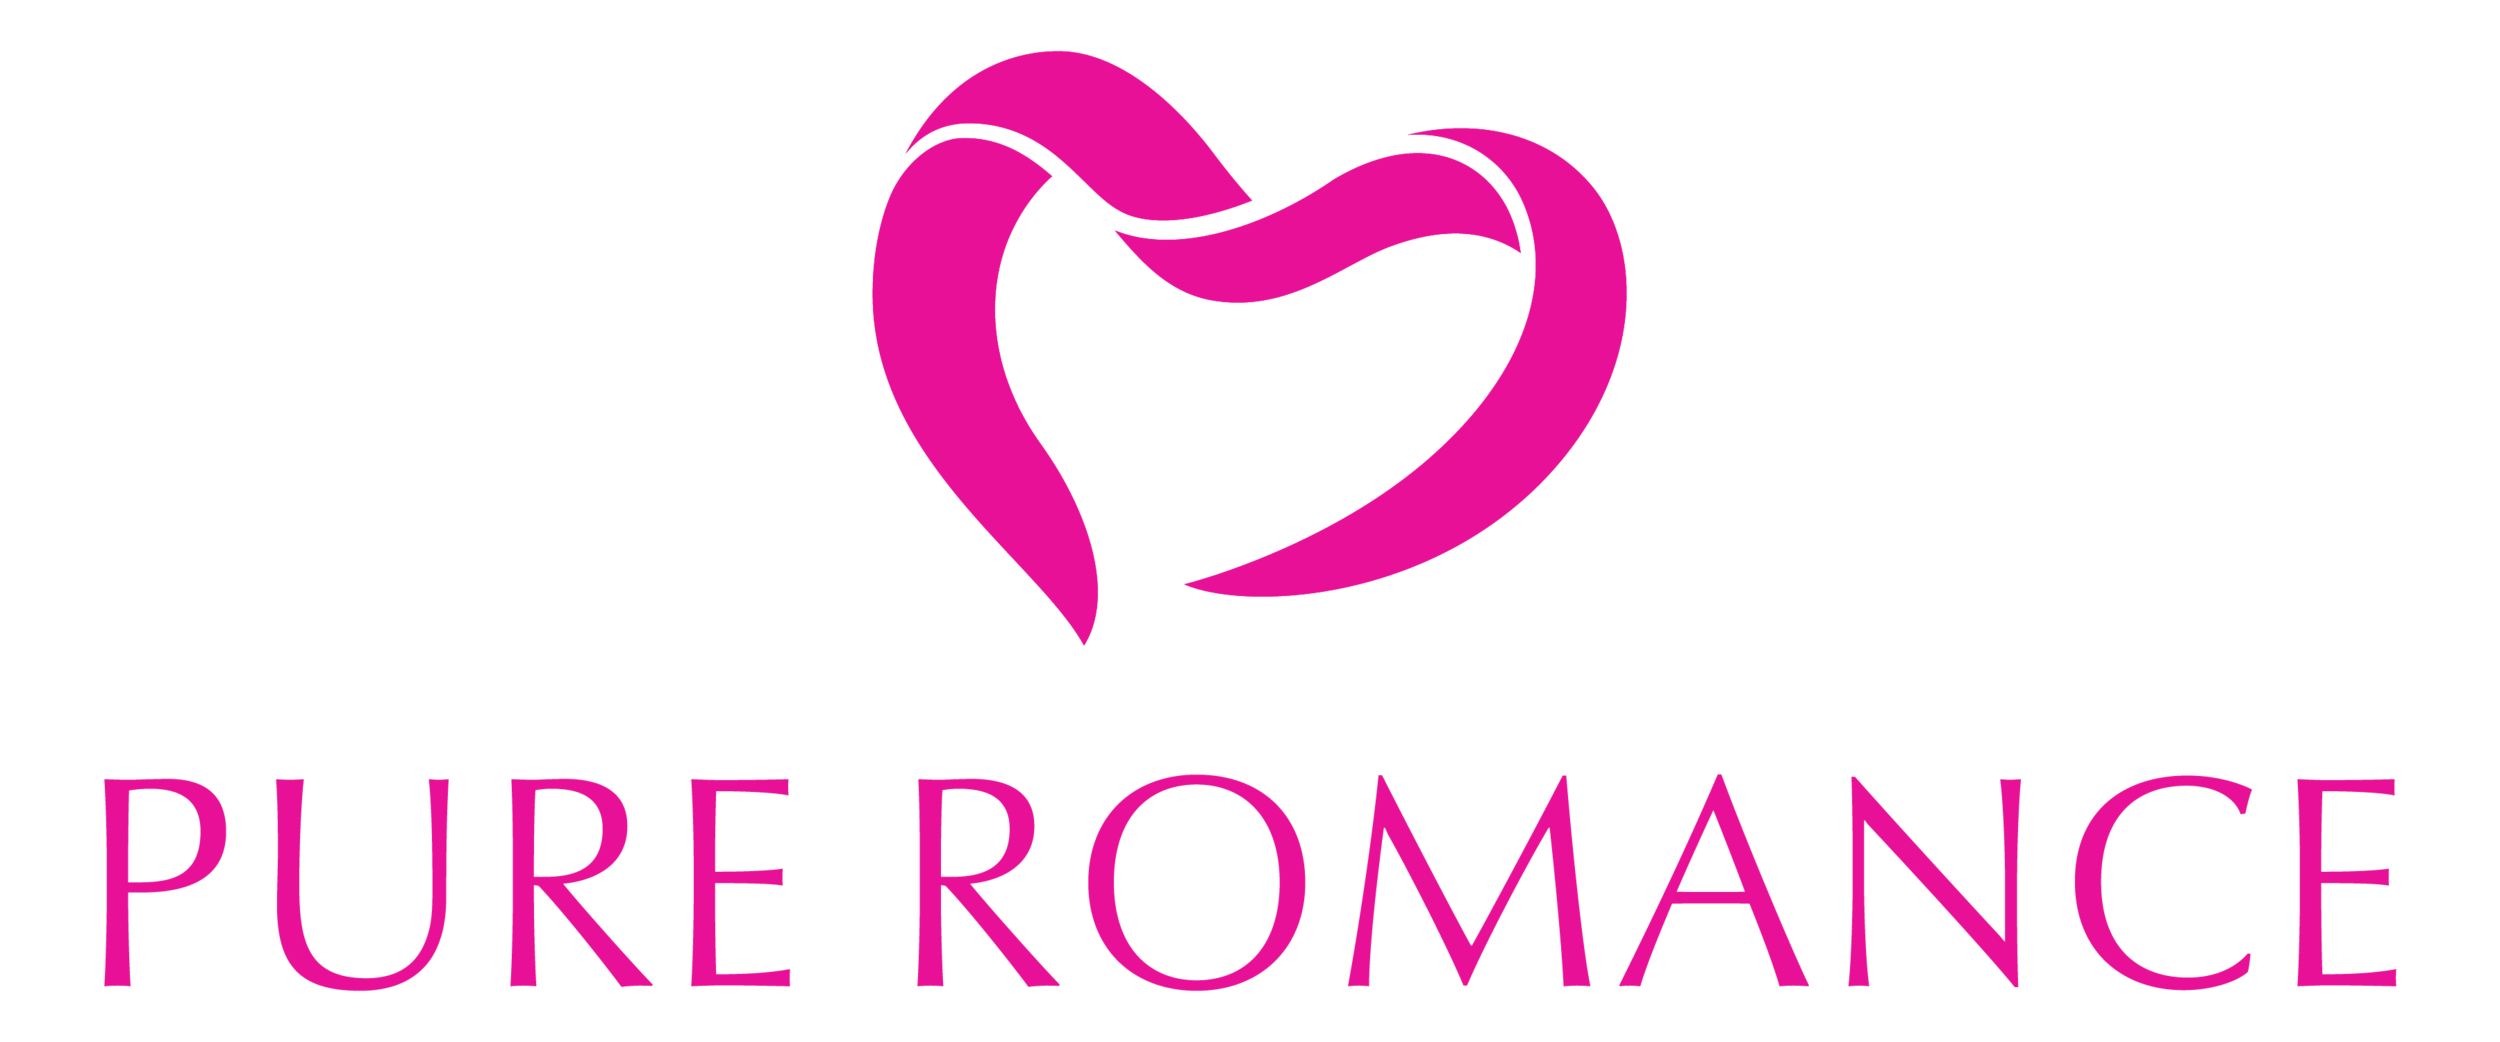 Stunning-Pure-Romance-Logo-40-For-Your-3d-Logo-Maker-with-Pure-Romance-Logo.jpg.png